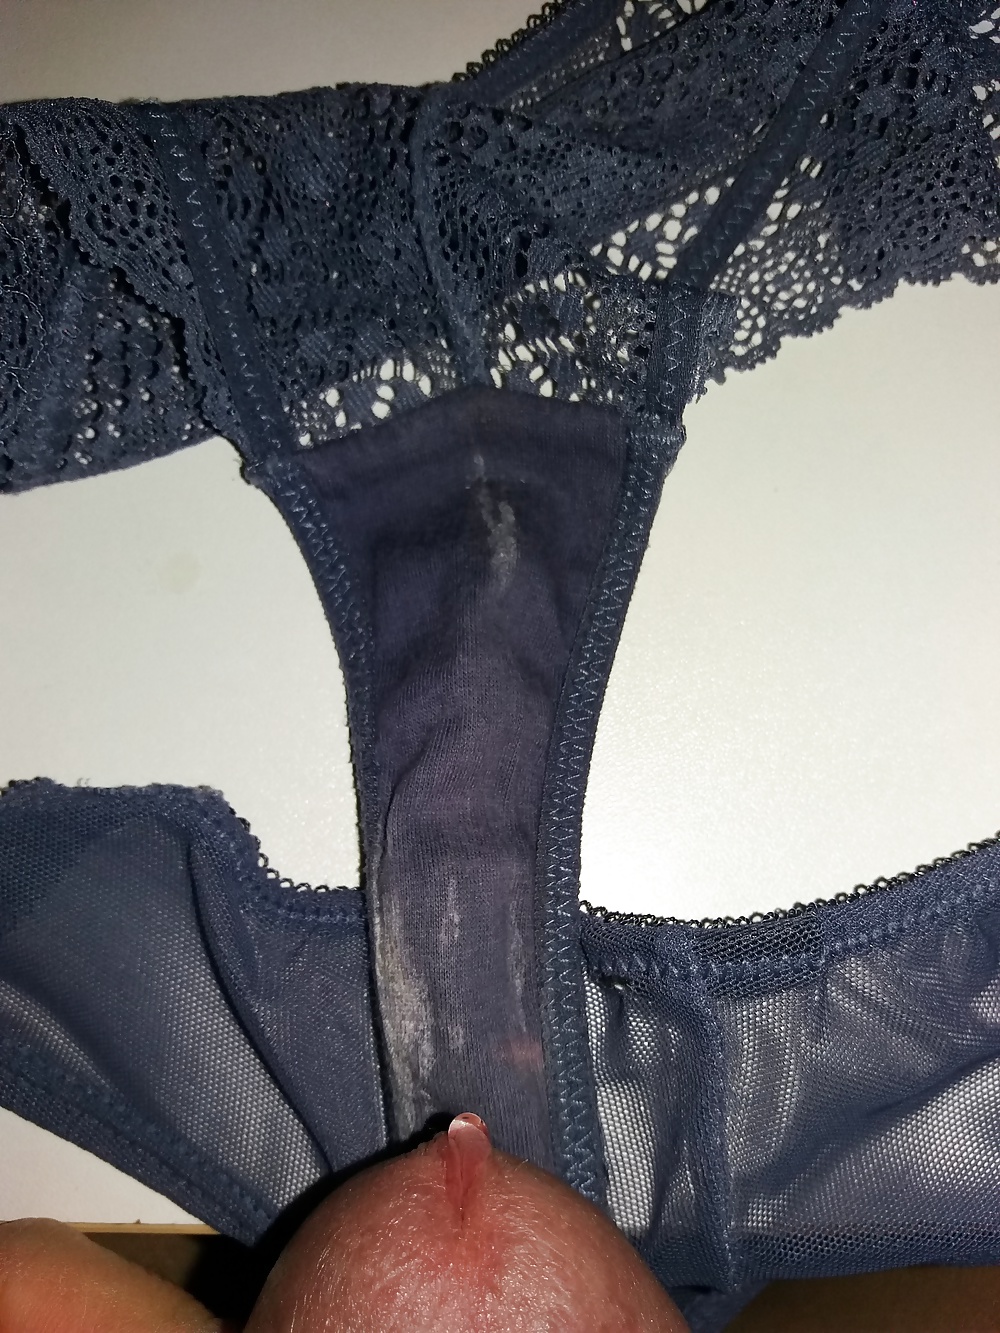 Cousin s dirty panty thong - Photo #4.